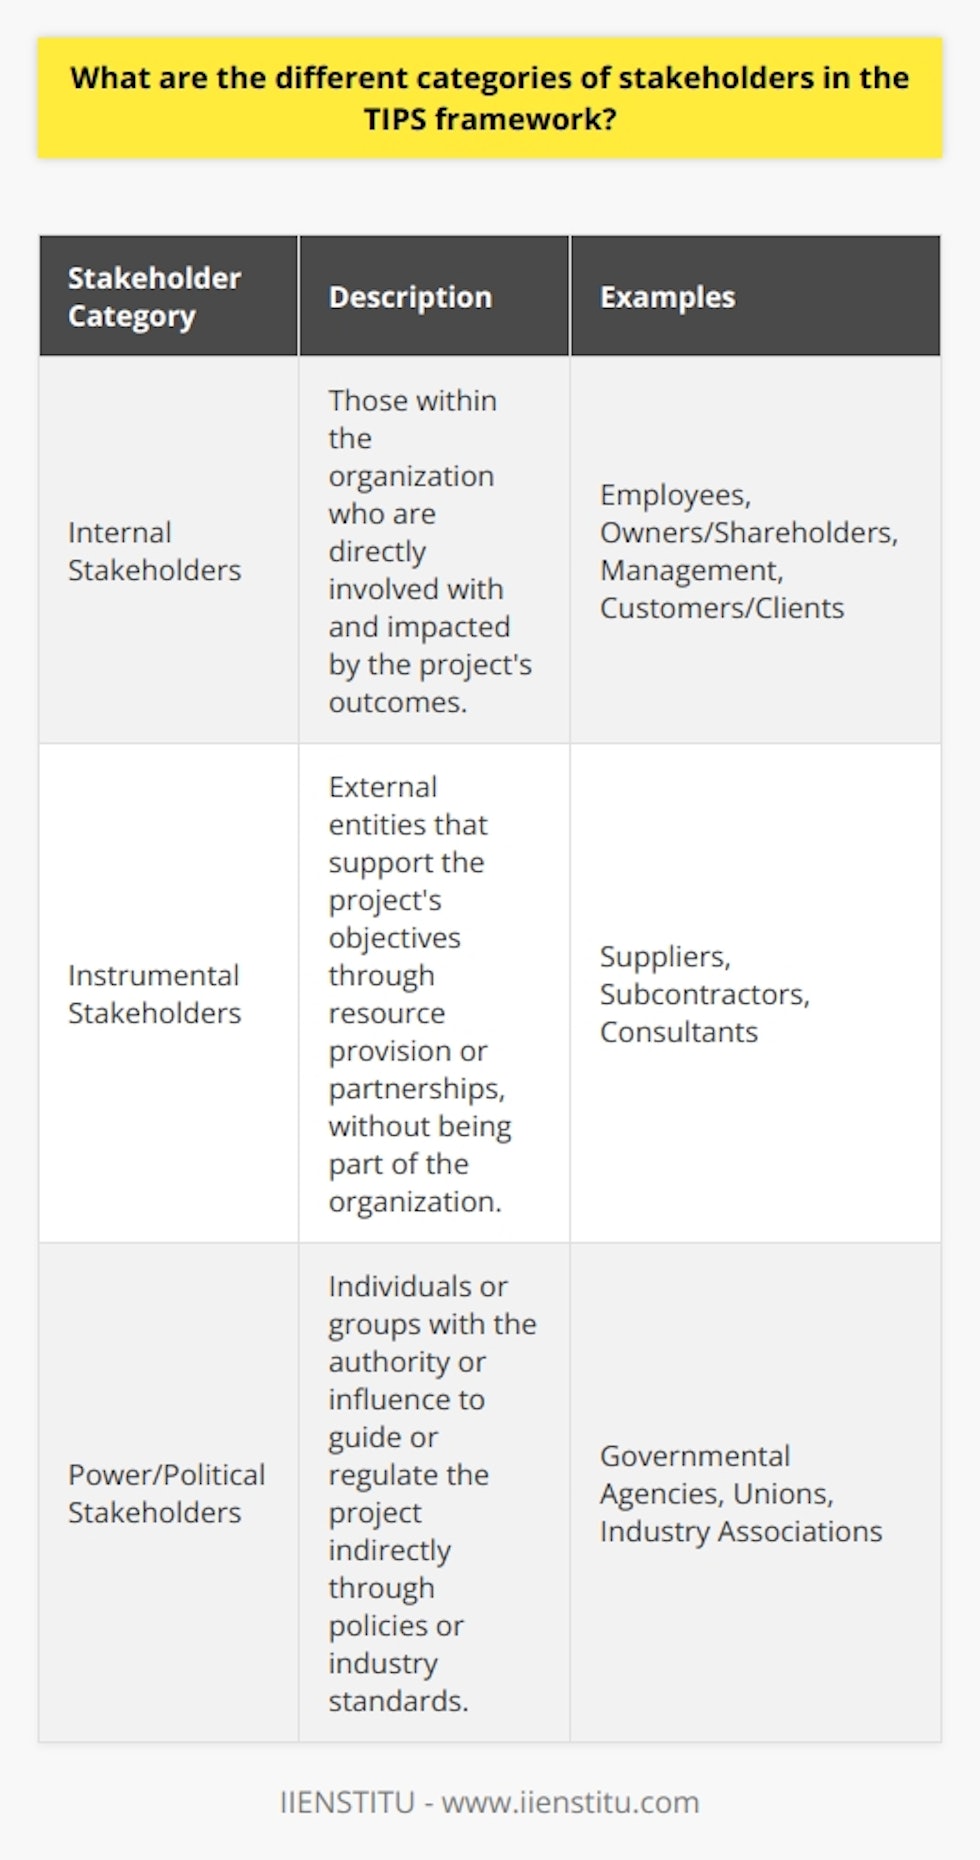 Within the realm of project management, stakeholder identification and engagement are key factors in a project's success. Enter the TIPS framework—an organizational model structured to understand and address the complexities of stakeholder interests and influences. The TIPS framework succinctly segments stakeholders into three primary categories, each with its unique implications for project management. The different categories of stakeholders in the TIPS framework are as follows:1. **Internal Stakeholders**: Internal stakeholders represent the backbone of the project; they are those within the organization who are most intimately involved with and impacted by the project's outcomes. Typically, this category includes:   - **Employees**: Individuals who operate within the company whose daily work is influenced by the project's progression.      - **Owners/Shareholders**: Those with ownership stakes in the company who are concerned with how the project affects profitability and value.      - **Management**: A subset of employees equipped with the authority to make strategic decisions can significantly shape the project's trajectory.      - **Customers/Clients**: When a project aims to create or improve services or products offered by the organization, the end-users' satisfaction becomes a significant concern.Internal stakeholders often have the most to gain or lose based on the project's outcome, and their support and enthusiasm are crucial for the project's propulsion.2. **Instrumental Stakeholders**: These are external entities that play a role in the facilitation of the project's objectives but aren't part of the organization. They typically influence the project through the resources they provide or through partnership implementations. Key players in this group include:   - **Suppliers**: Companies or individuals providing the raw materials or products necessary for the project.      - **Subcontractors**: Third-party participants fulfilling specific project roles or tasks that are not managed directly by the organization.      - **Consultants**: Subject matter experts who offer specialized knowledge or expertise that enhance the project's performance.Instrumental stakeholders may not be affected by the day-to-day outcomes of the project, but their involvement is critical to completing project deliverables.3. **Power/Political Stakeholders**: This group is distinctive in that their interest and stake in the project are rooted in their authority, regulatory powers, or ability to influence public or industry opinions. They can significantly guide the project without being directly impacted by its success or failure. This group includes:   - **Governmental Agencies**: Bodies that can impose regulatory constraints or provide necessary approvals for progressing the project.      - **Unions**: Labor unions may have a vested interest in how the project affects member employment and workplace conditions.      - **Industry Associations**: Organizations that represent broader industry interests and establish guidelines or standards that the project may need to adhere to.Power/Political stakeholders are often capable of influencing the project through the policies they control or their authority within the sector or community.Understanding these three categories of stakeholders in the TIPS framework enables project managers to tailor their engagement strategies. Each category has distinct characteristics and modes of influence, and recognizing these nuances allows for better communication, risk management, and negotiation, leading to more successful projects. By aligning internal milestones and goals with the needs and powers of instrumental and power/political stakeholders, project managers can navigate complex interpersonal terrain and create collaborative, efficient, and goal-oriented project atmospheres.